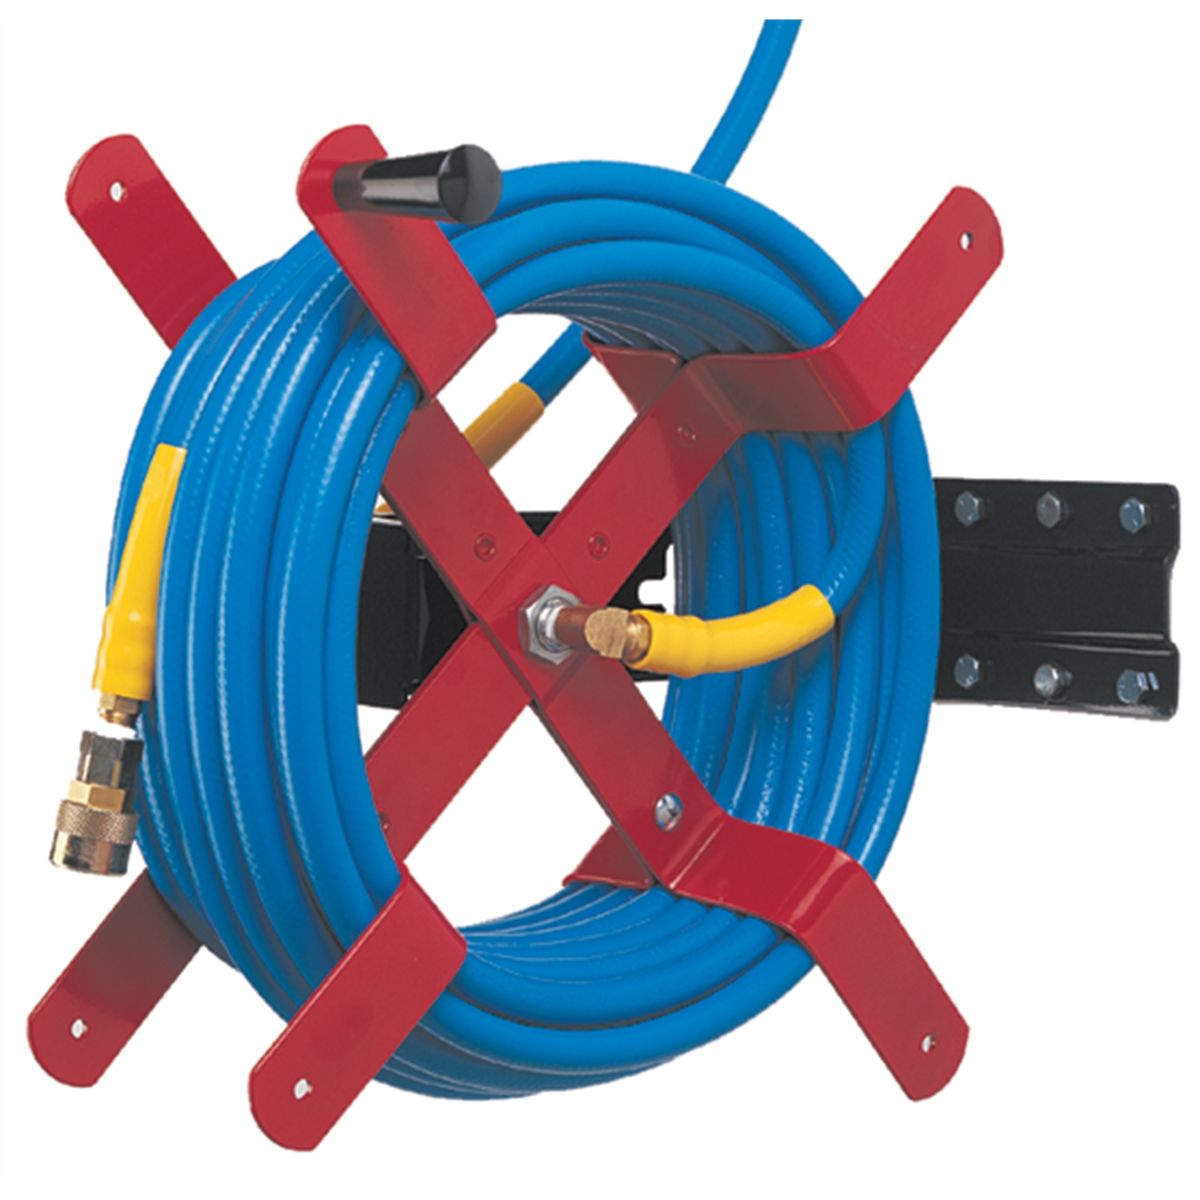 Air Hose Reels Wall Mount: SP Systems Air Hose Reel by SP Systems